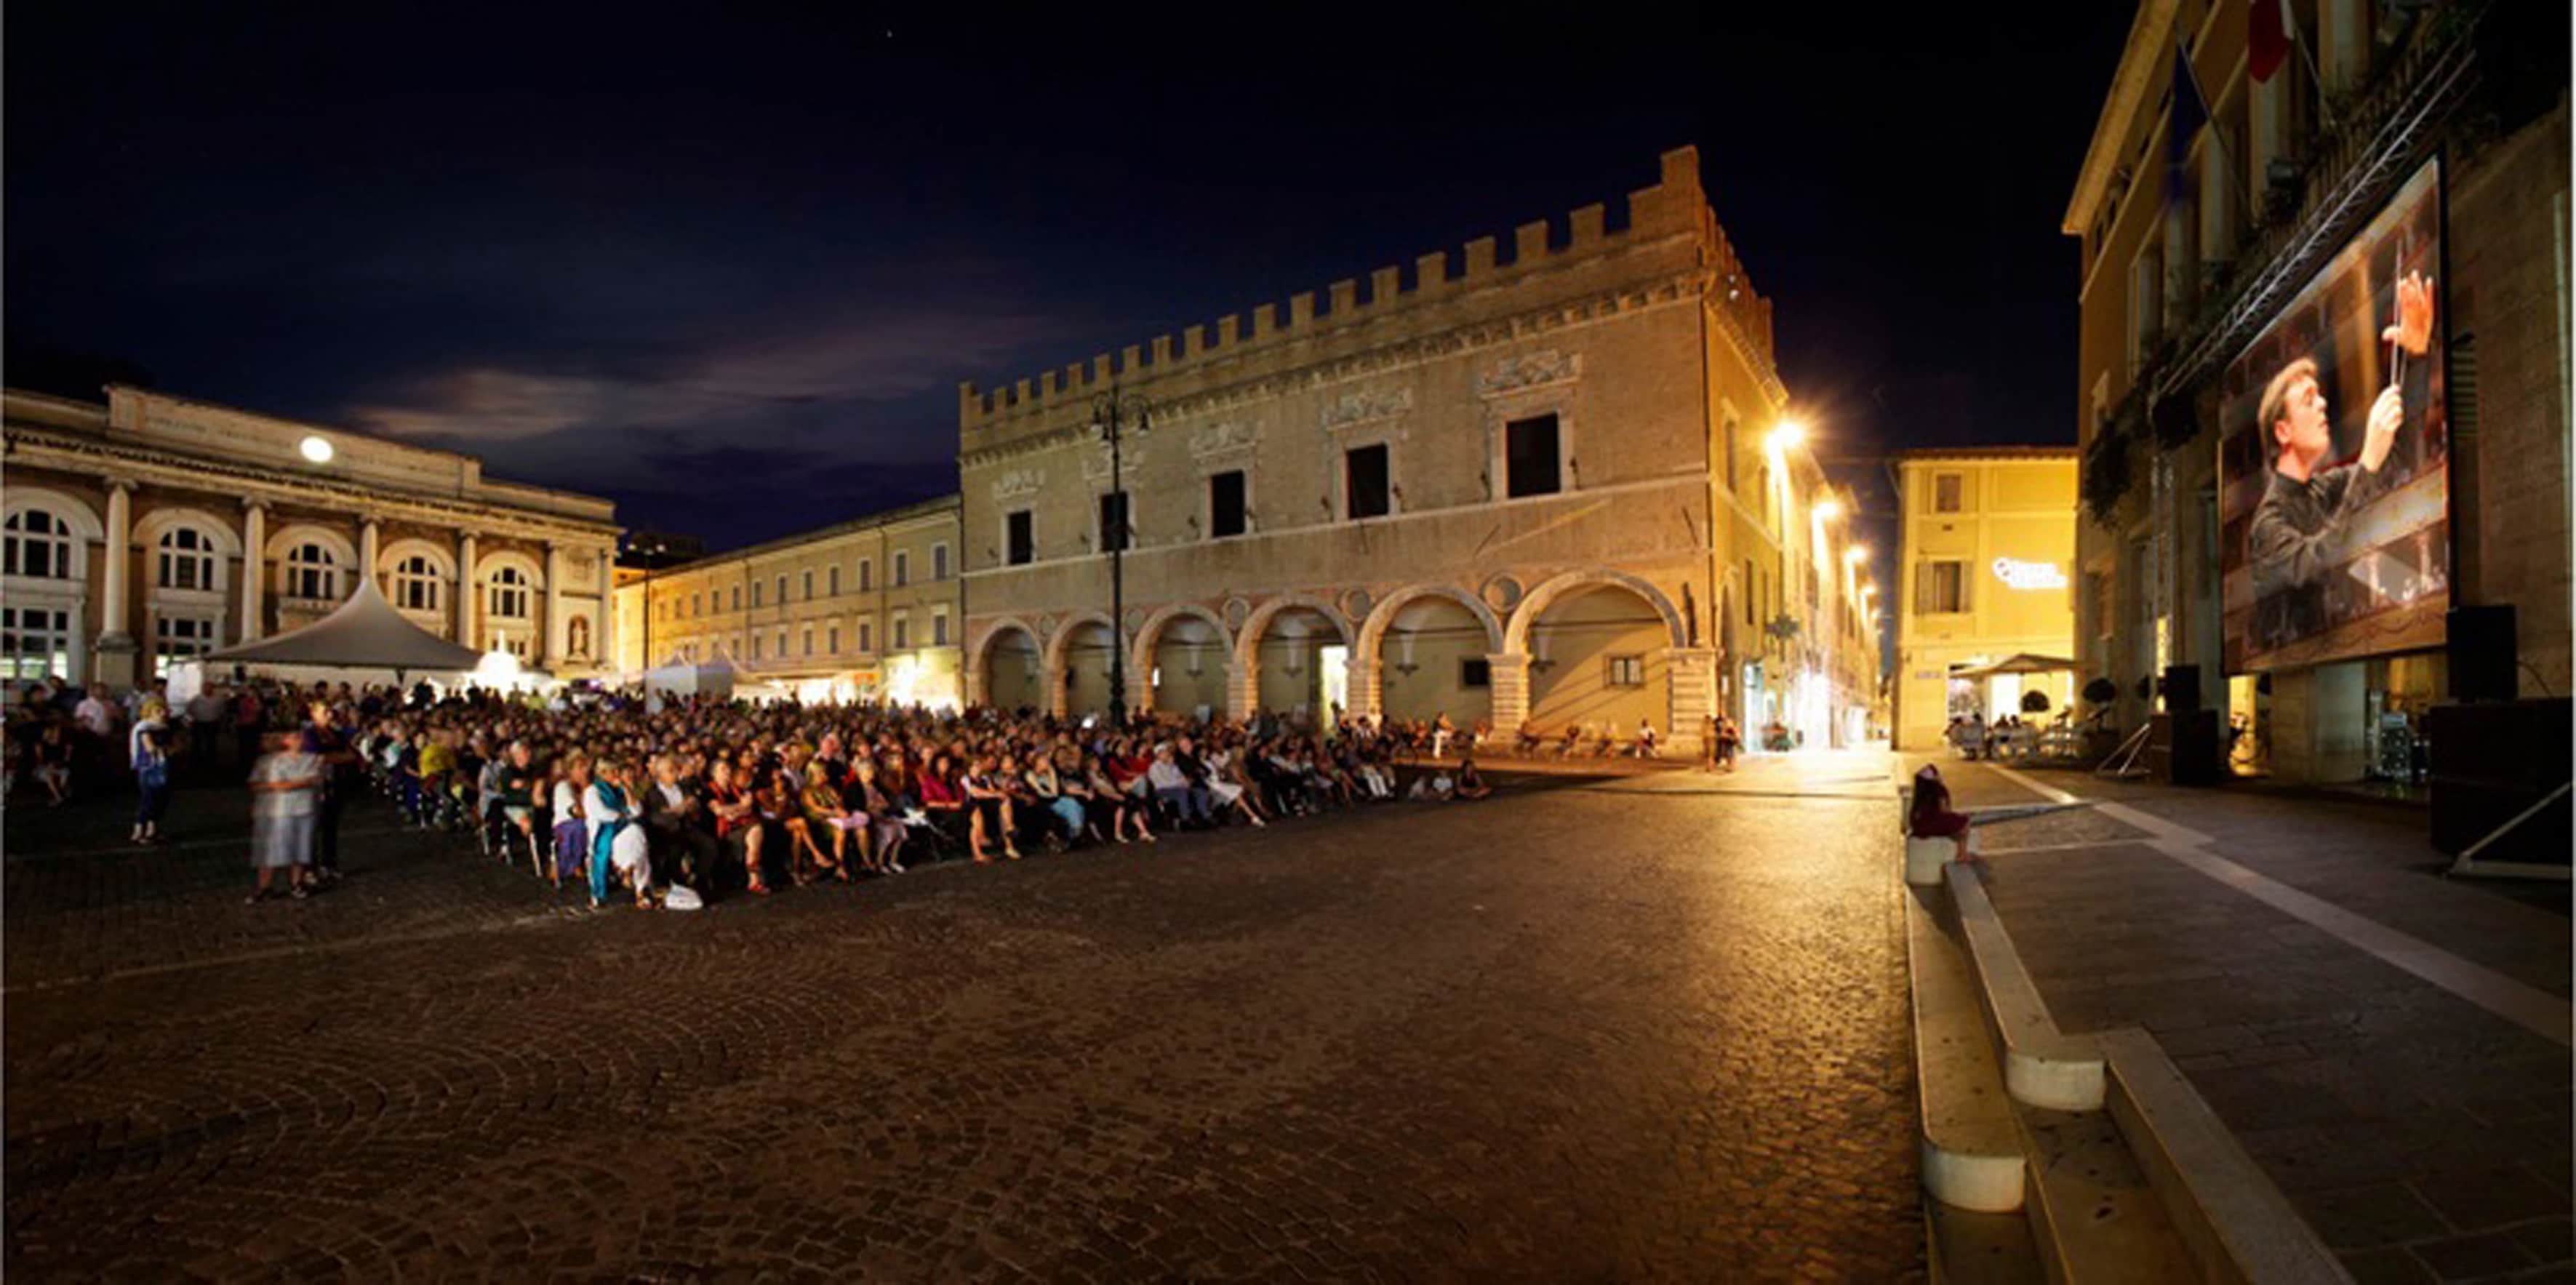 Rossini Festival will go ahead with audience confined in boxes